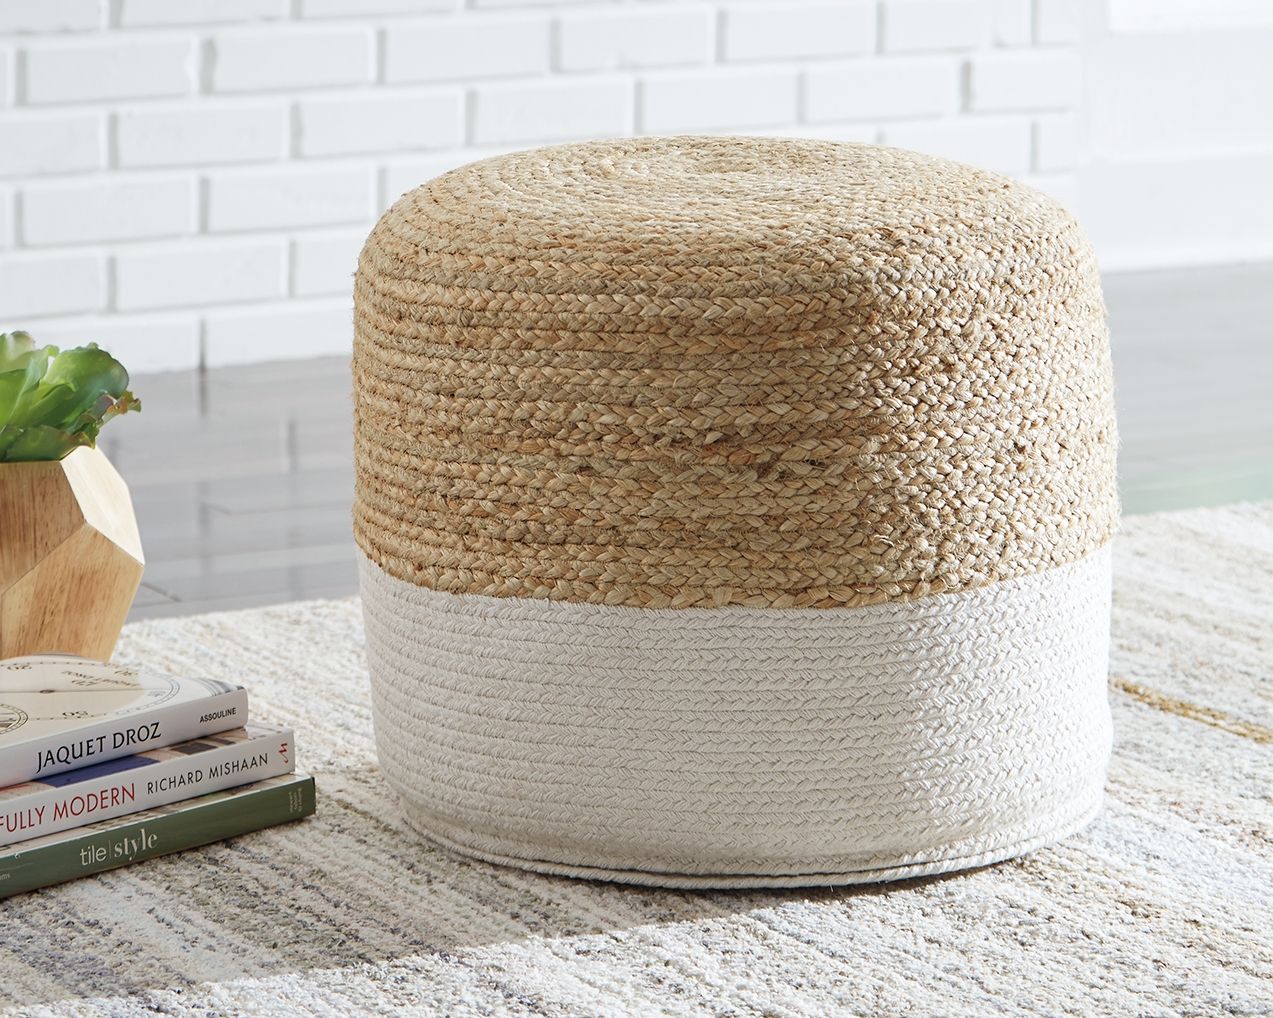 Sweed - Round - Pouf - Tony's Home Furnishings